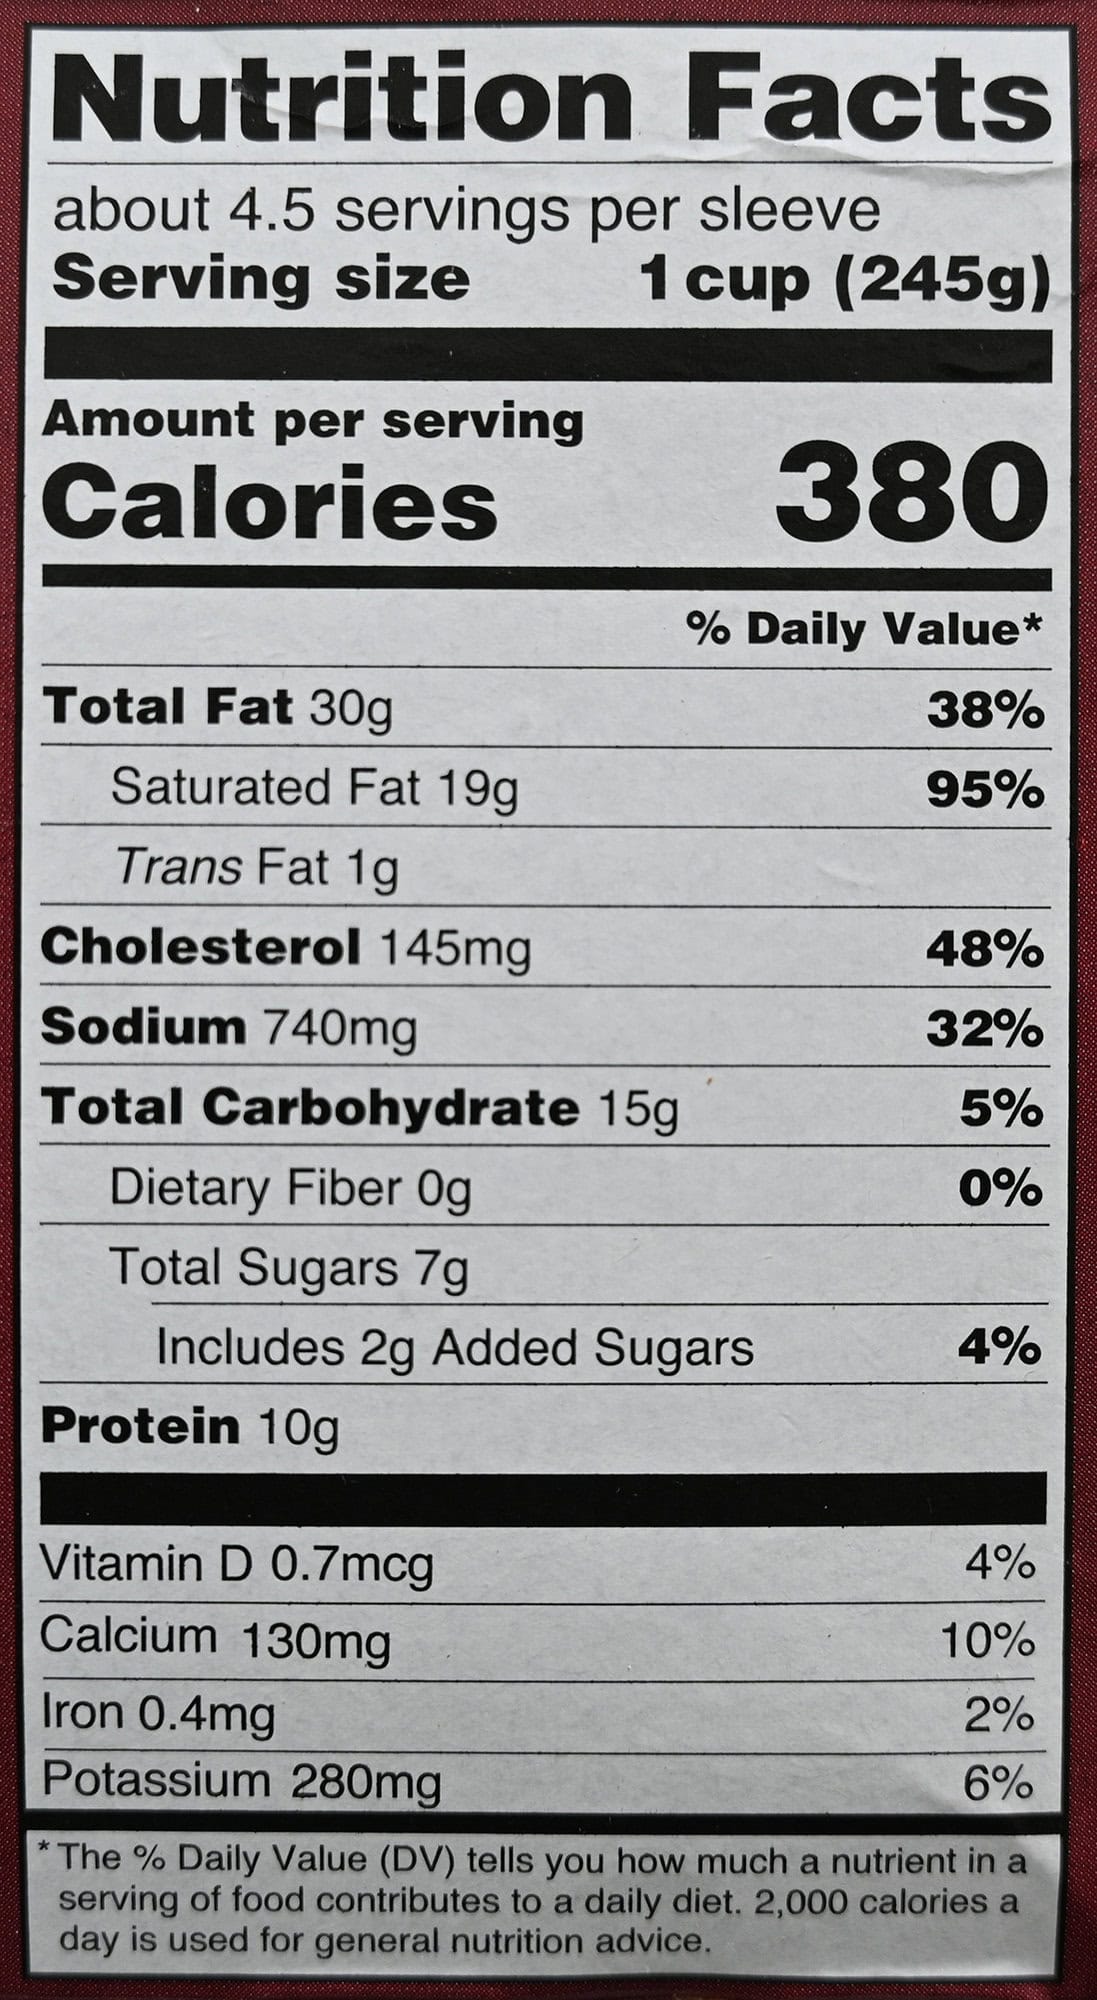 Image of the nutrition facts for the bisque from the packaging.